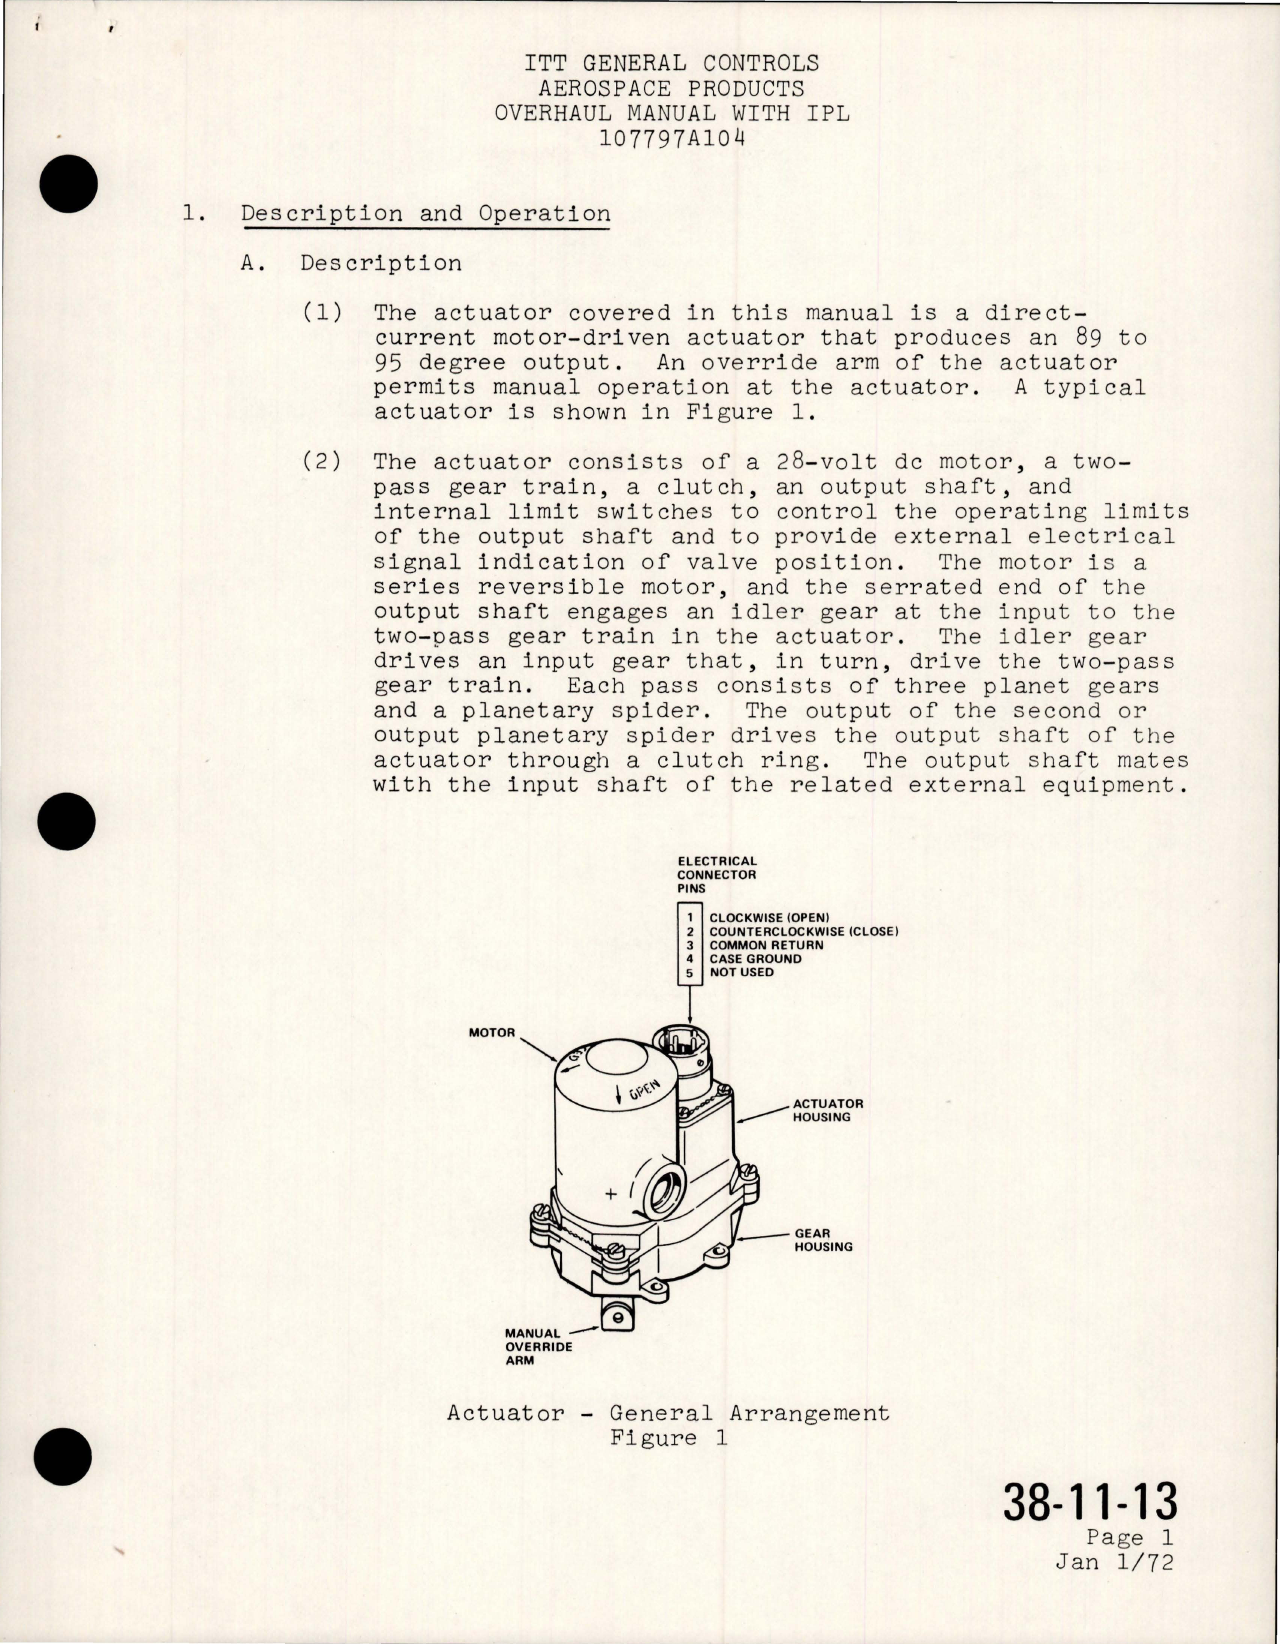 Sample page 7 from AirCorps Library document: Overhaul w Illustrated Parts List for Actuator - Part 107797A104 